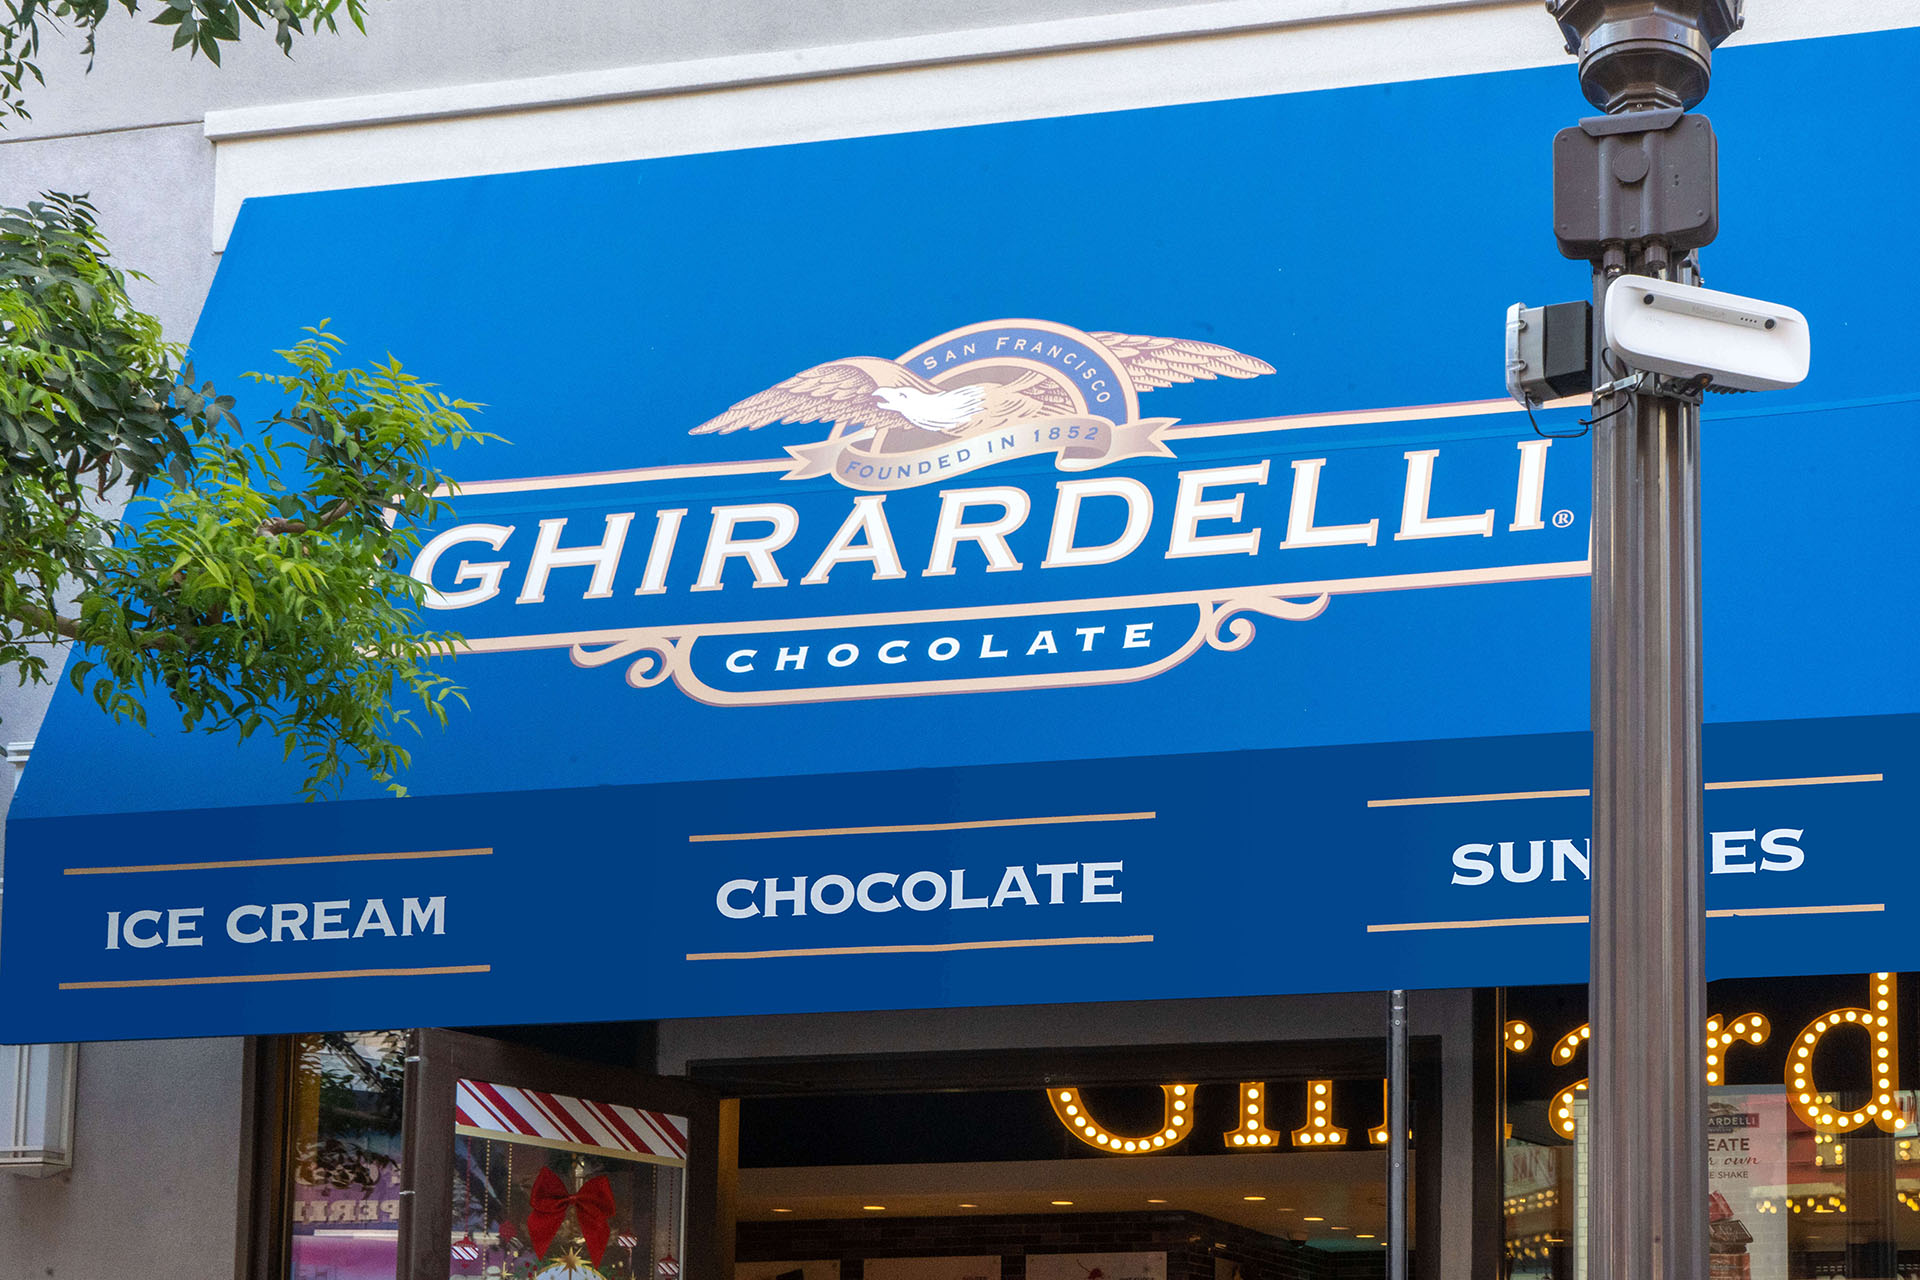 Ghirardelli Ice Cream and Chocolate Shop - Custom Awnings by Met